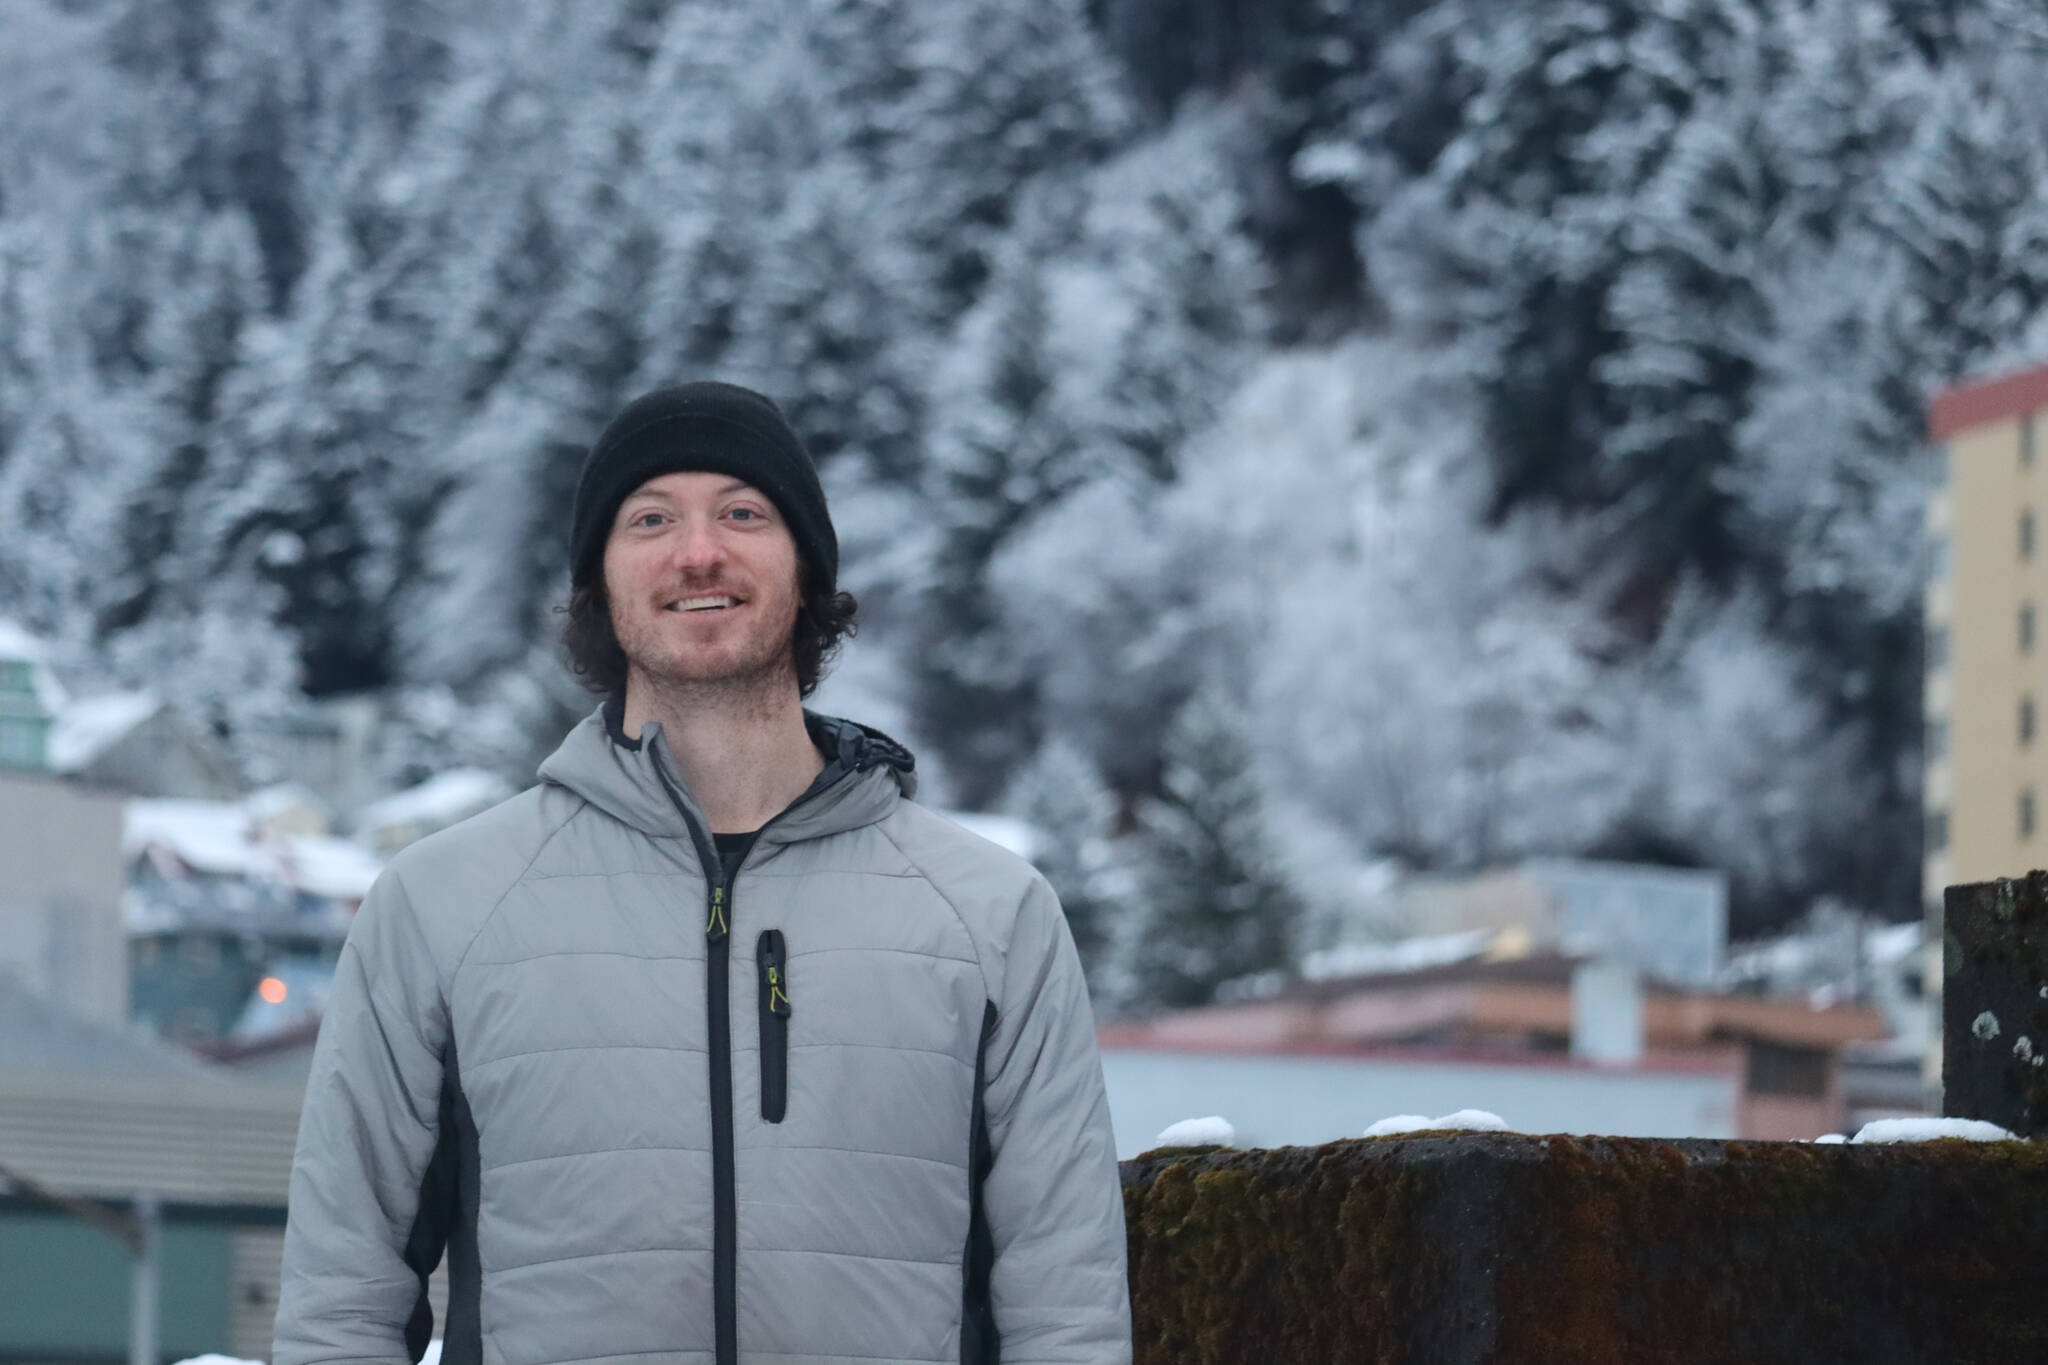 Mark Rainery poses for photo in downtown Juneau to help celebrate the recent showing of his collaborative DIY snowboarding film, “The Outliers,” which premiered at the Hangar Ballroom on Feb. 11. (Jonson Kuhn / Juneau Empire)